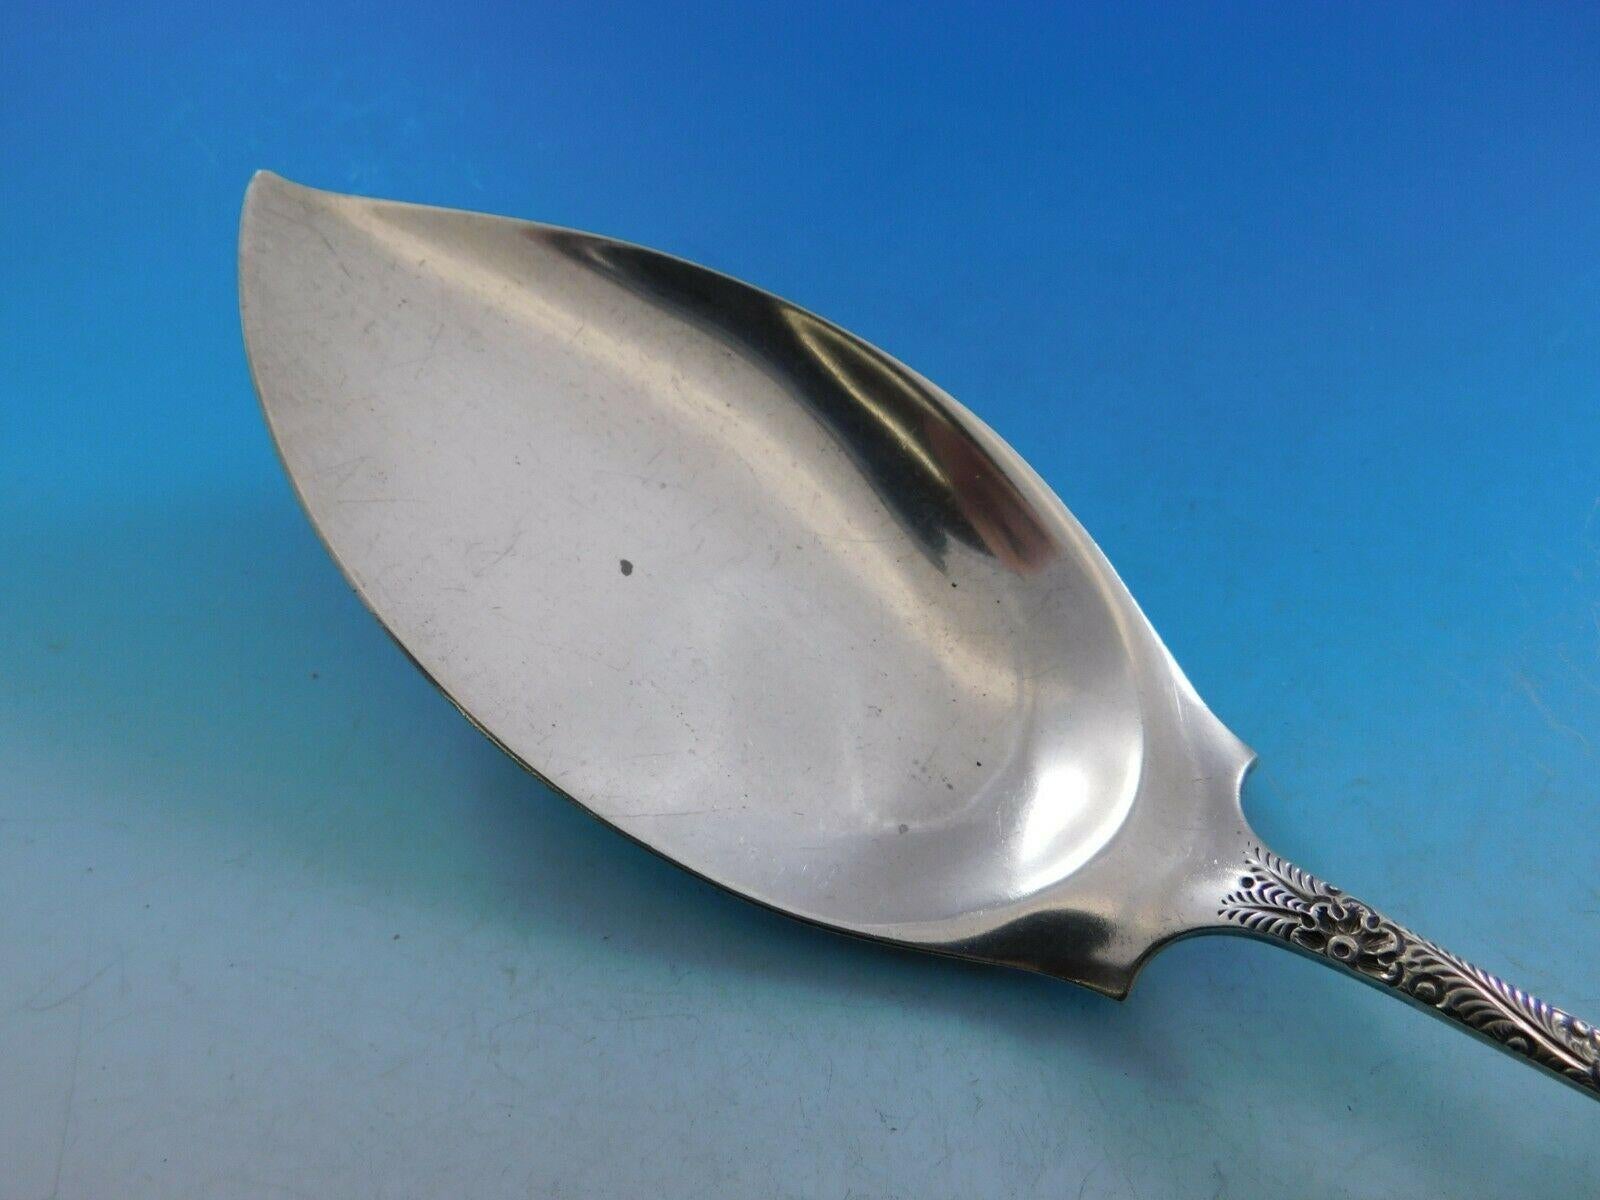 Antique engraved aka custom engraved by Tiffany and Co.

Masterfully crafted sterling silver ice cream server measuring 11